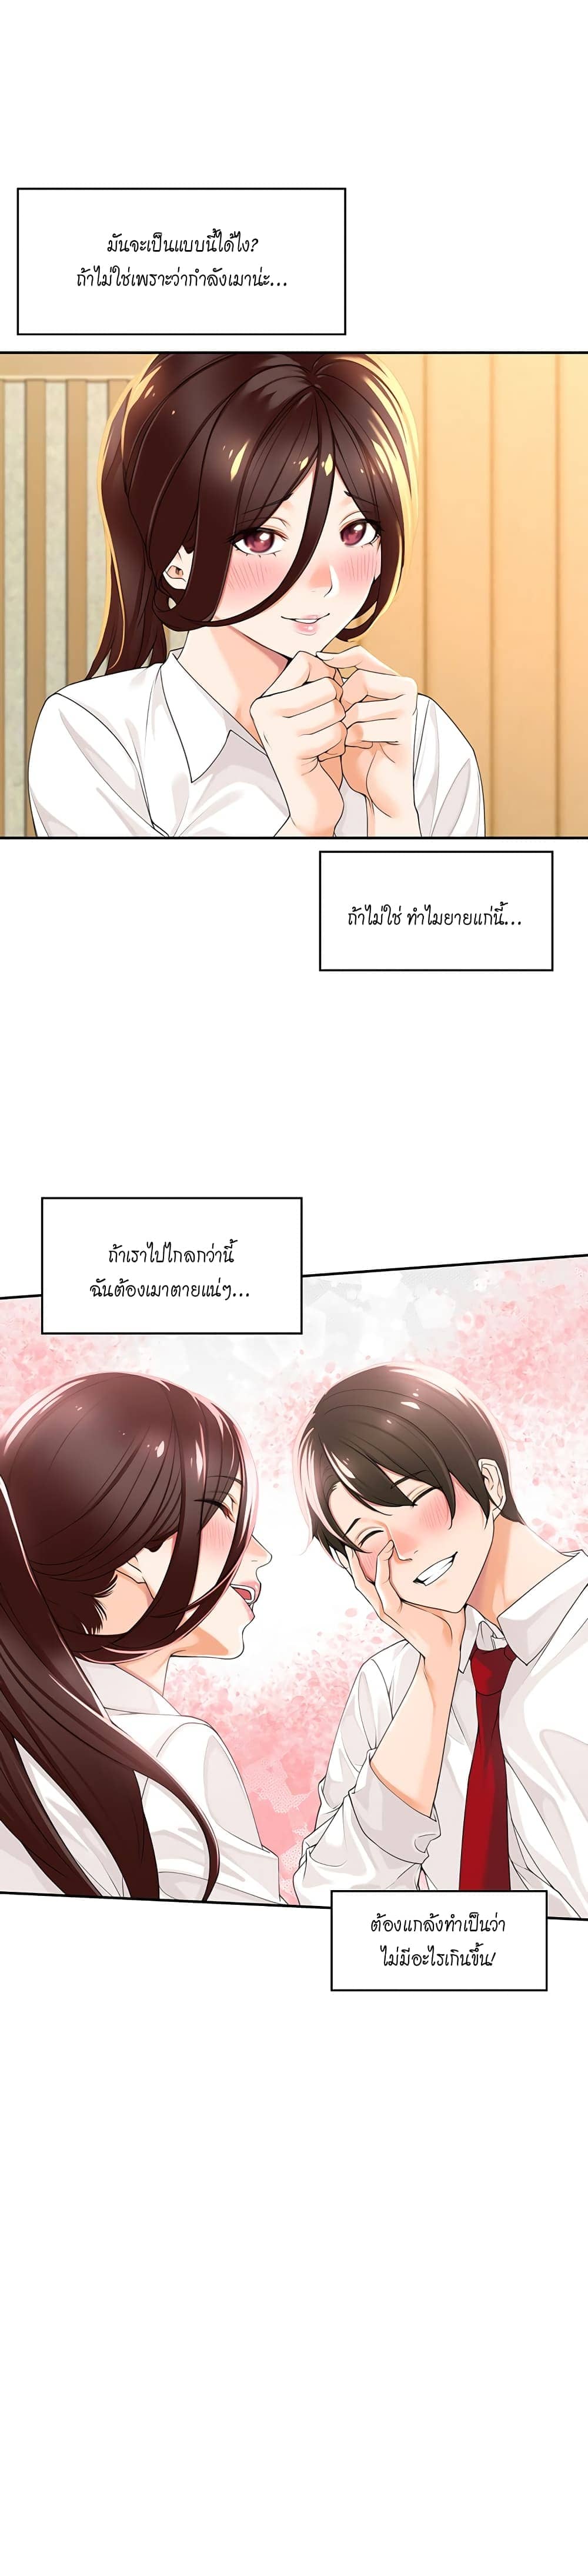 Manager, Please Scold Me ตอนที่ 2 ภาพ 16